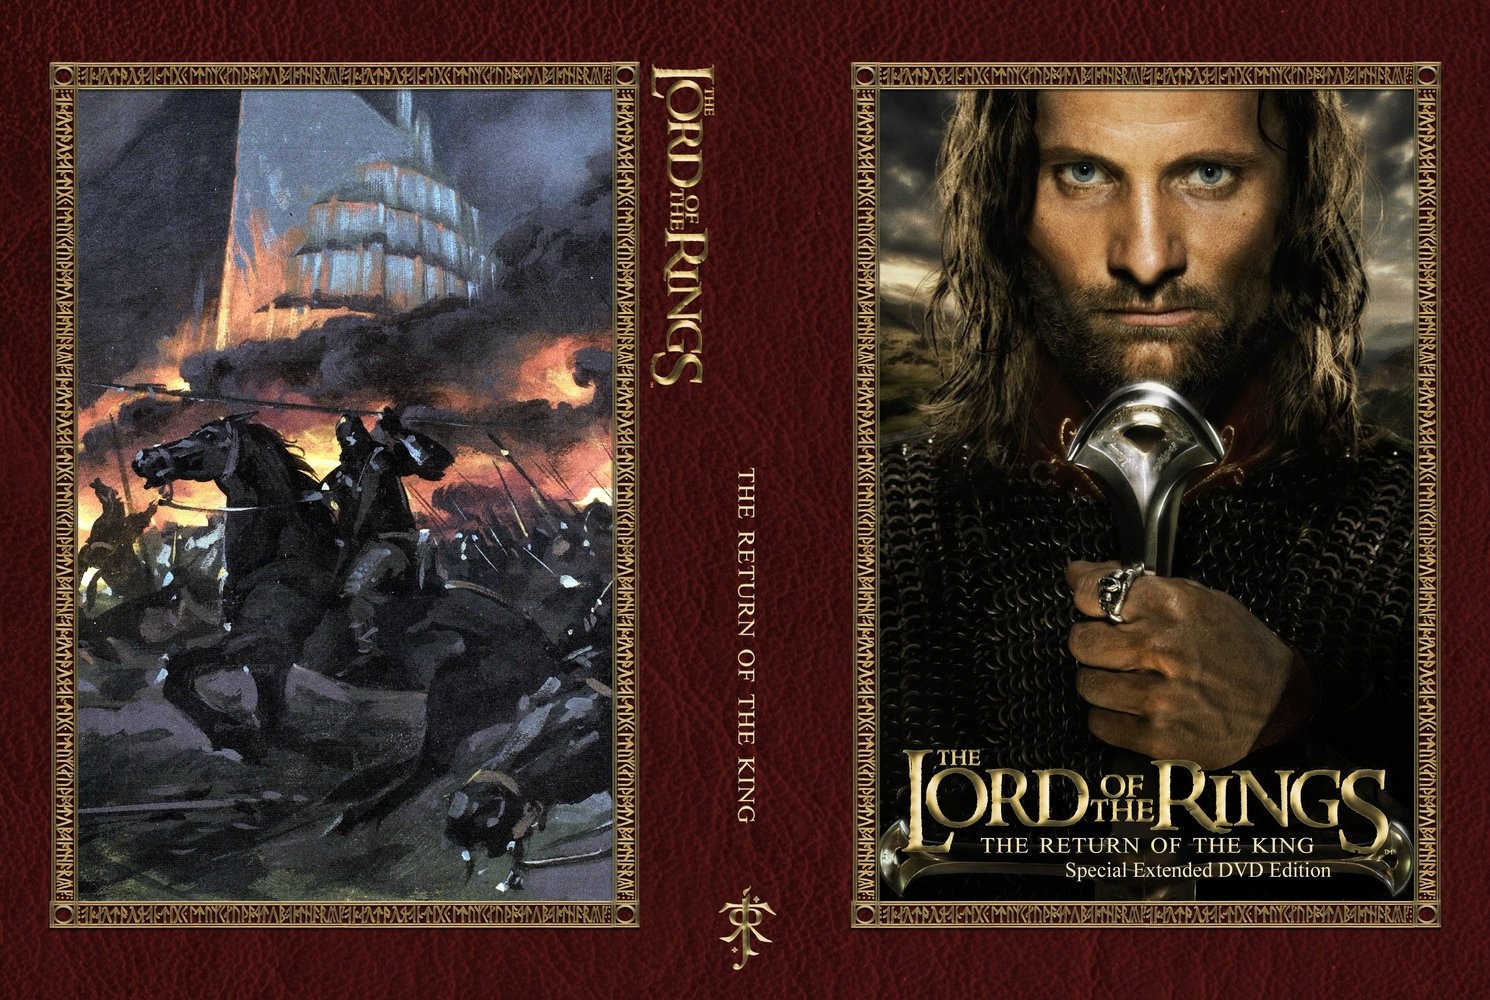 The Lord of the Rings: The Return of the King box cover